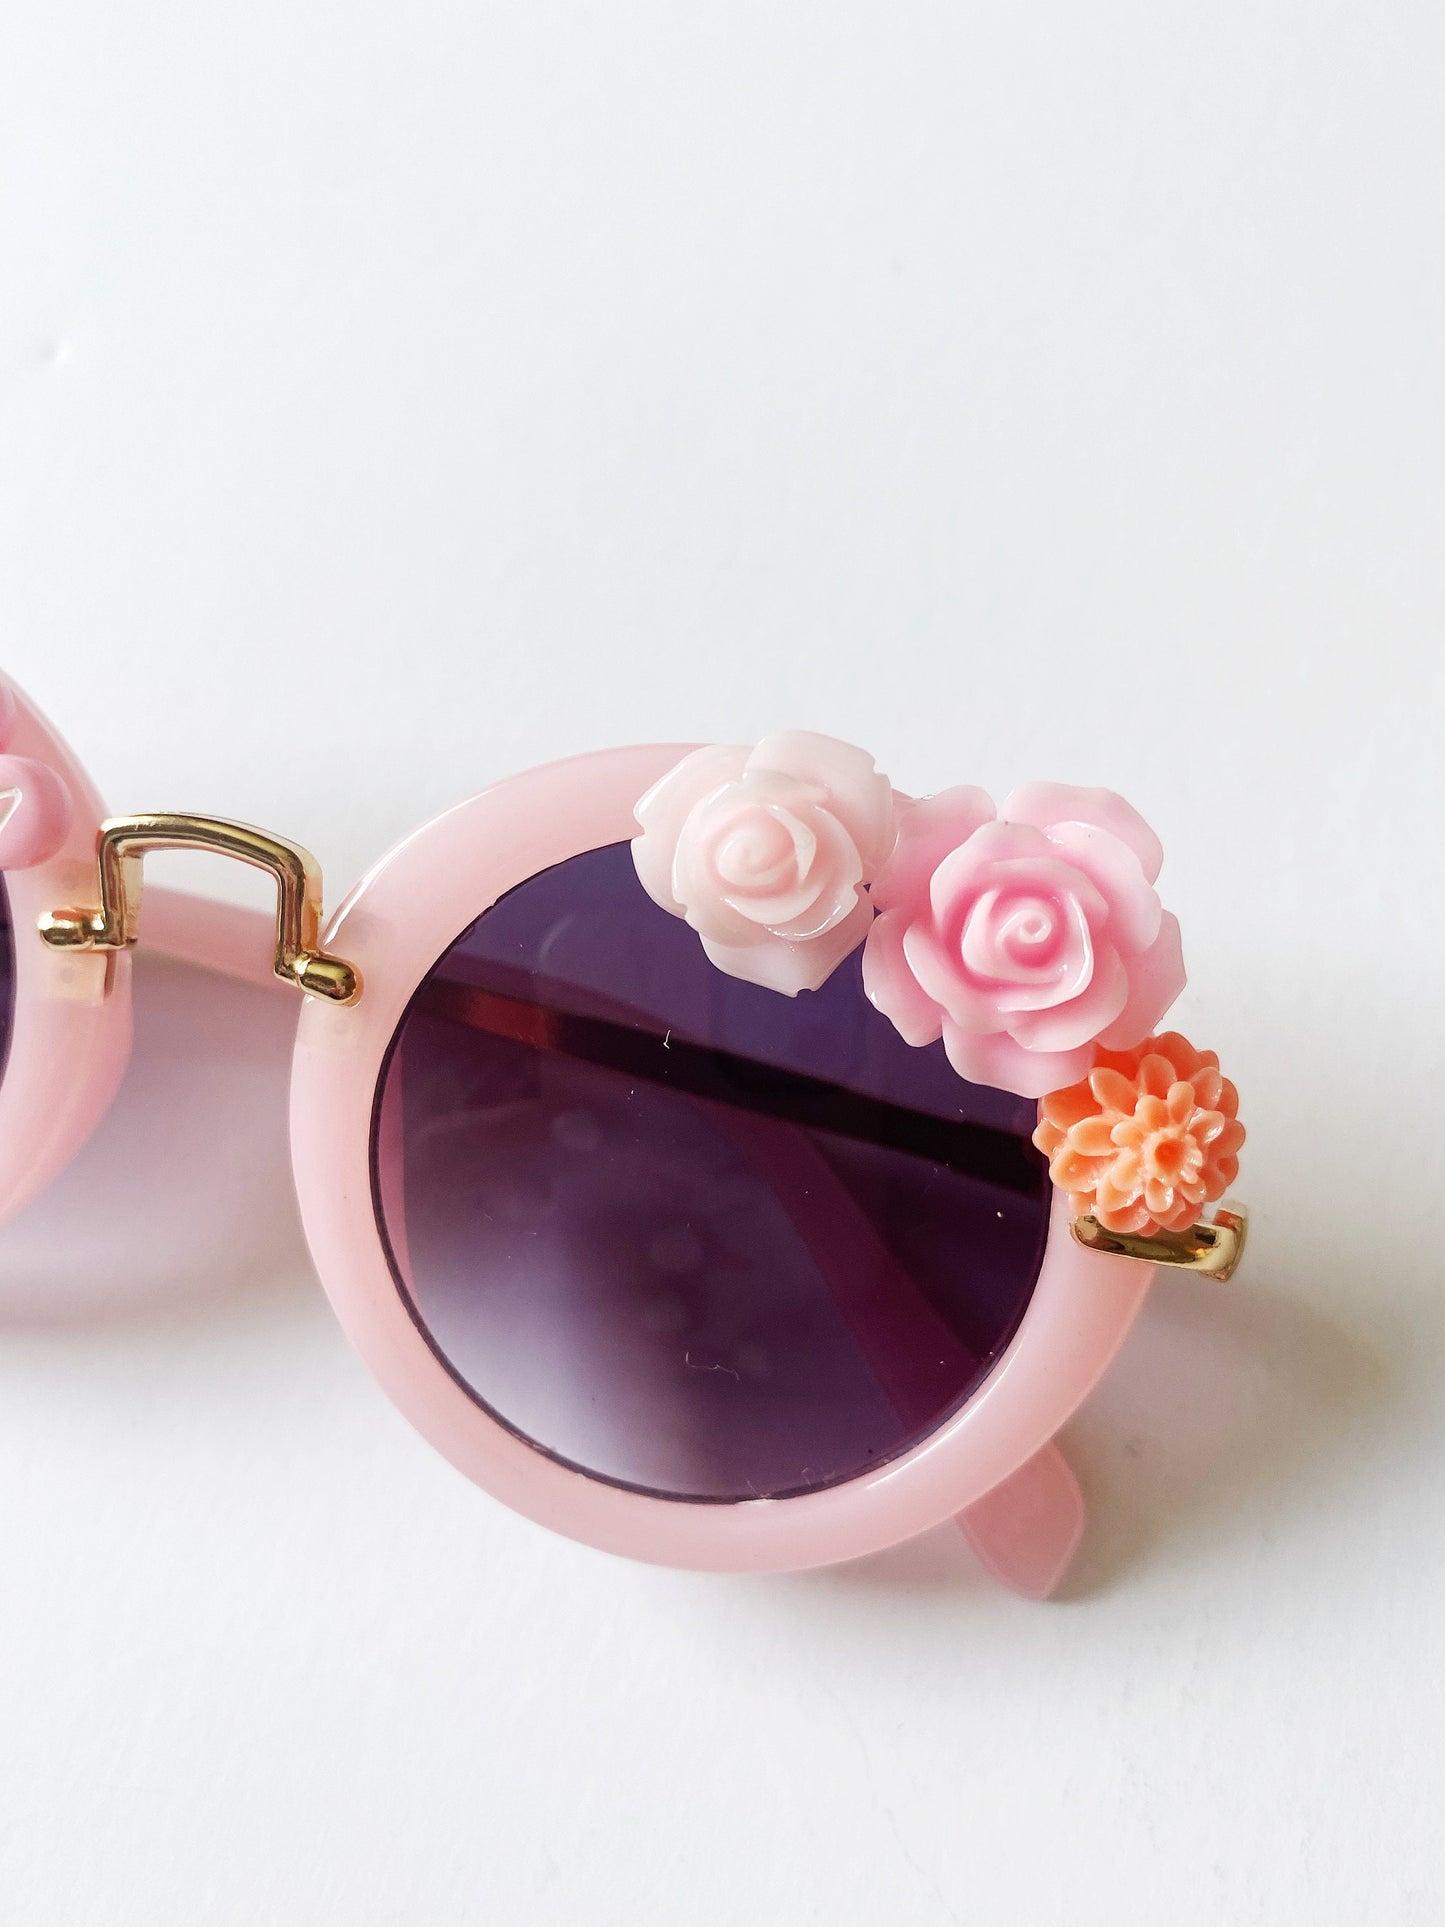 Retro Pink Sunnies, More Styles Available